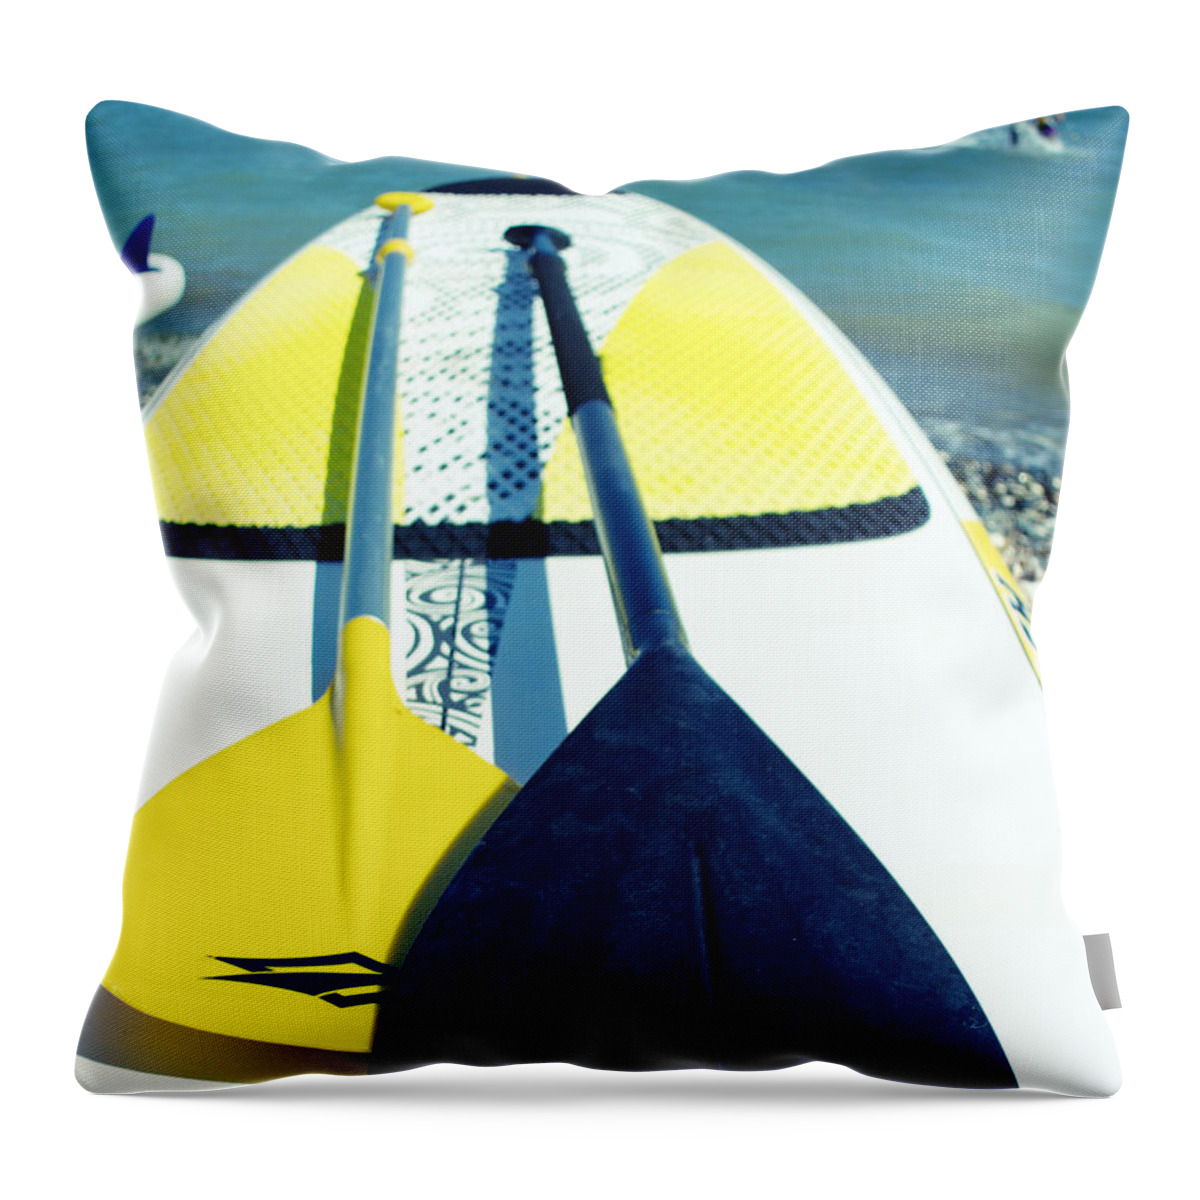 Action Throw Pillow featuring the photograph Stand Up Paddle Board by Stelios Kleanthous